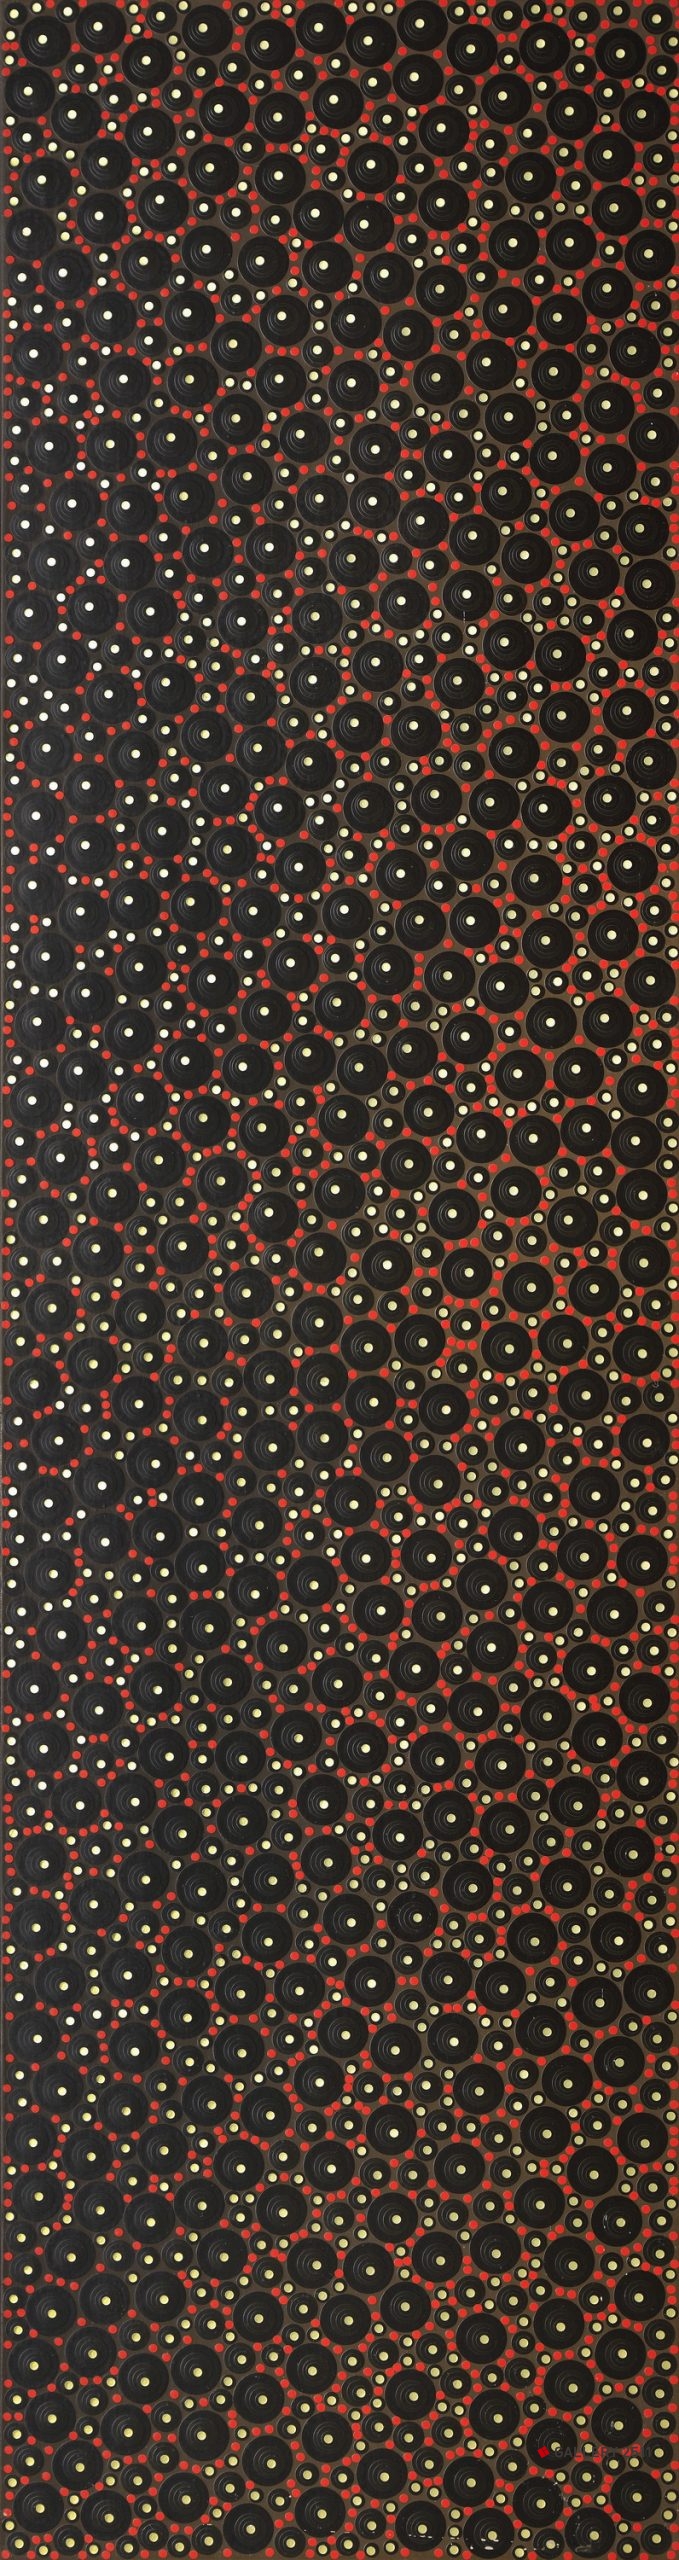 No.083 -「black and small red.gold on dark brown」
 캔버스、스티커, 
 W405mm × H1500mm, 
 1995